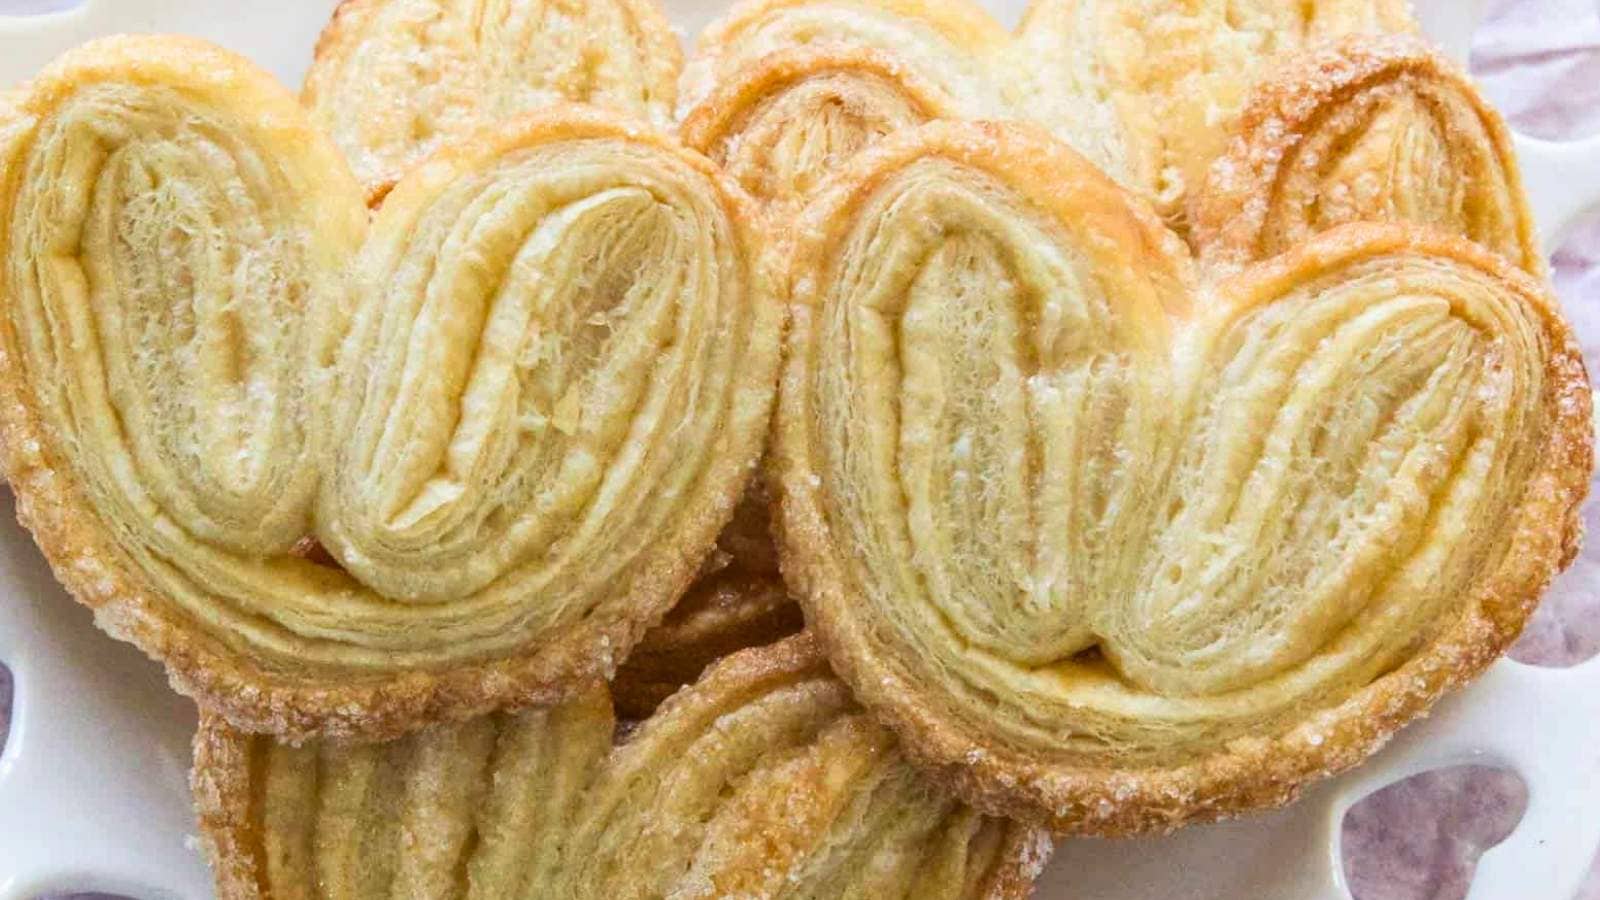 Palmiers recipe by Delicious Table.